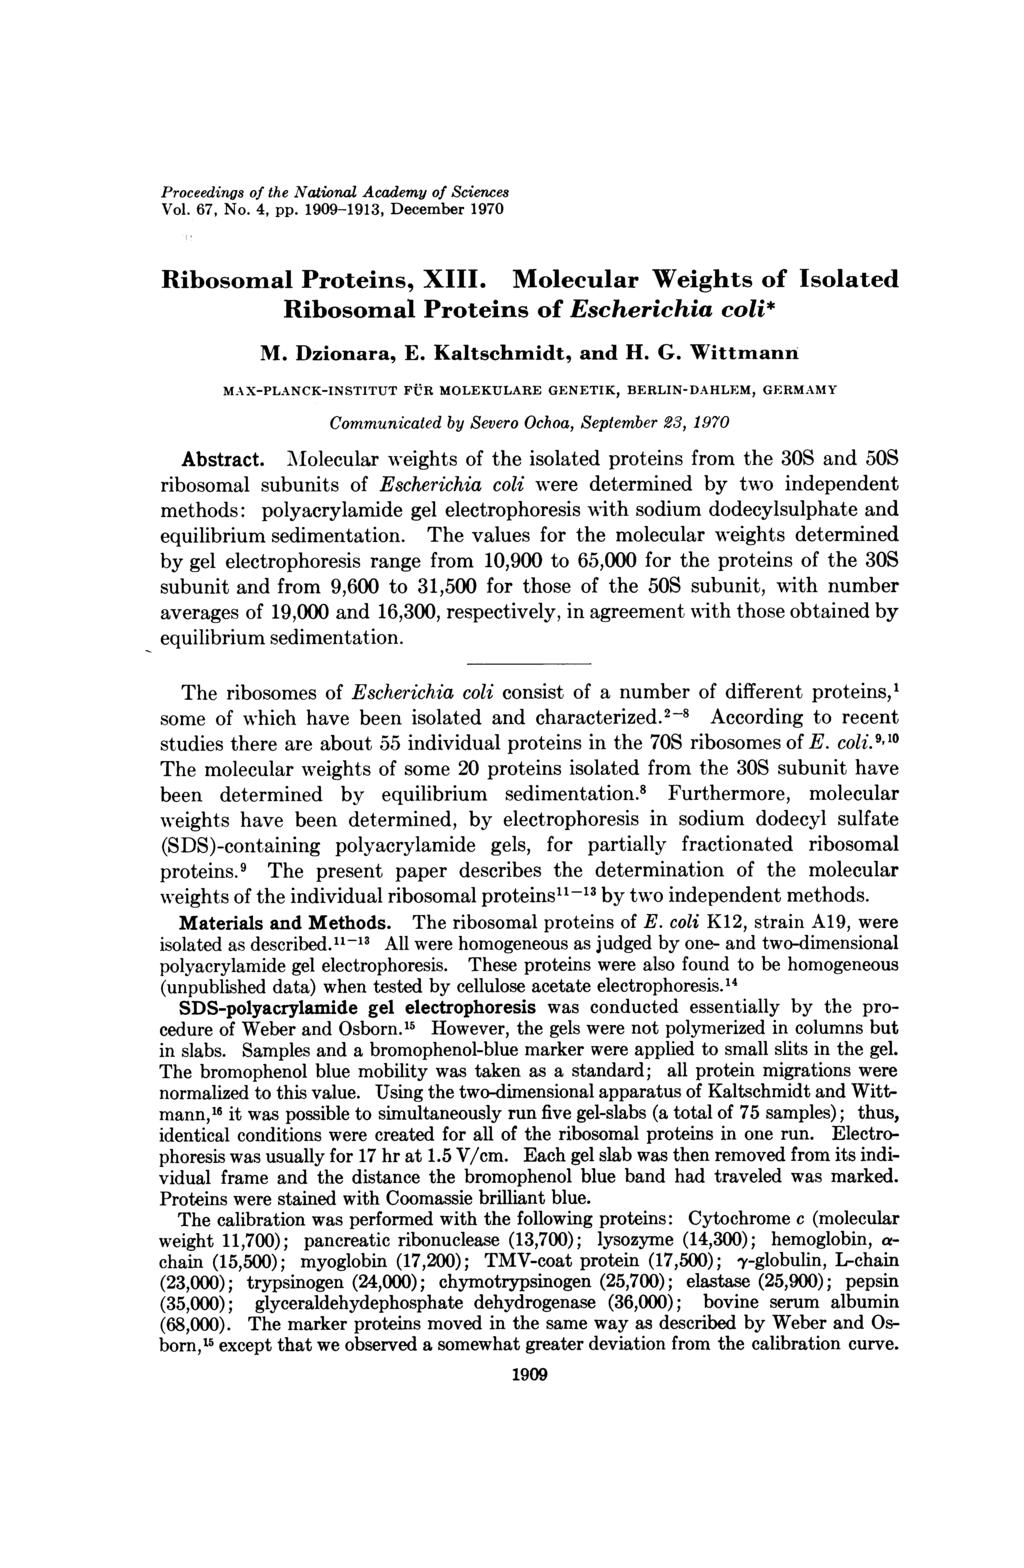 Proceedings of the National Academy of Sciences Vol. 67, No. 4, pp. 1909-1913, December 1970 Ribosomal Proteins, XIII. Molecular Weights of Isolated Ribosomal Proteins of Escherichia coli* M.